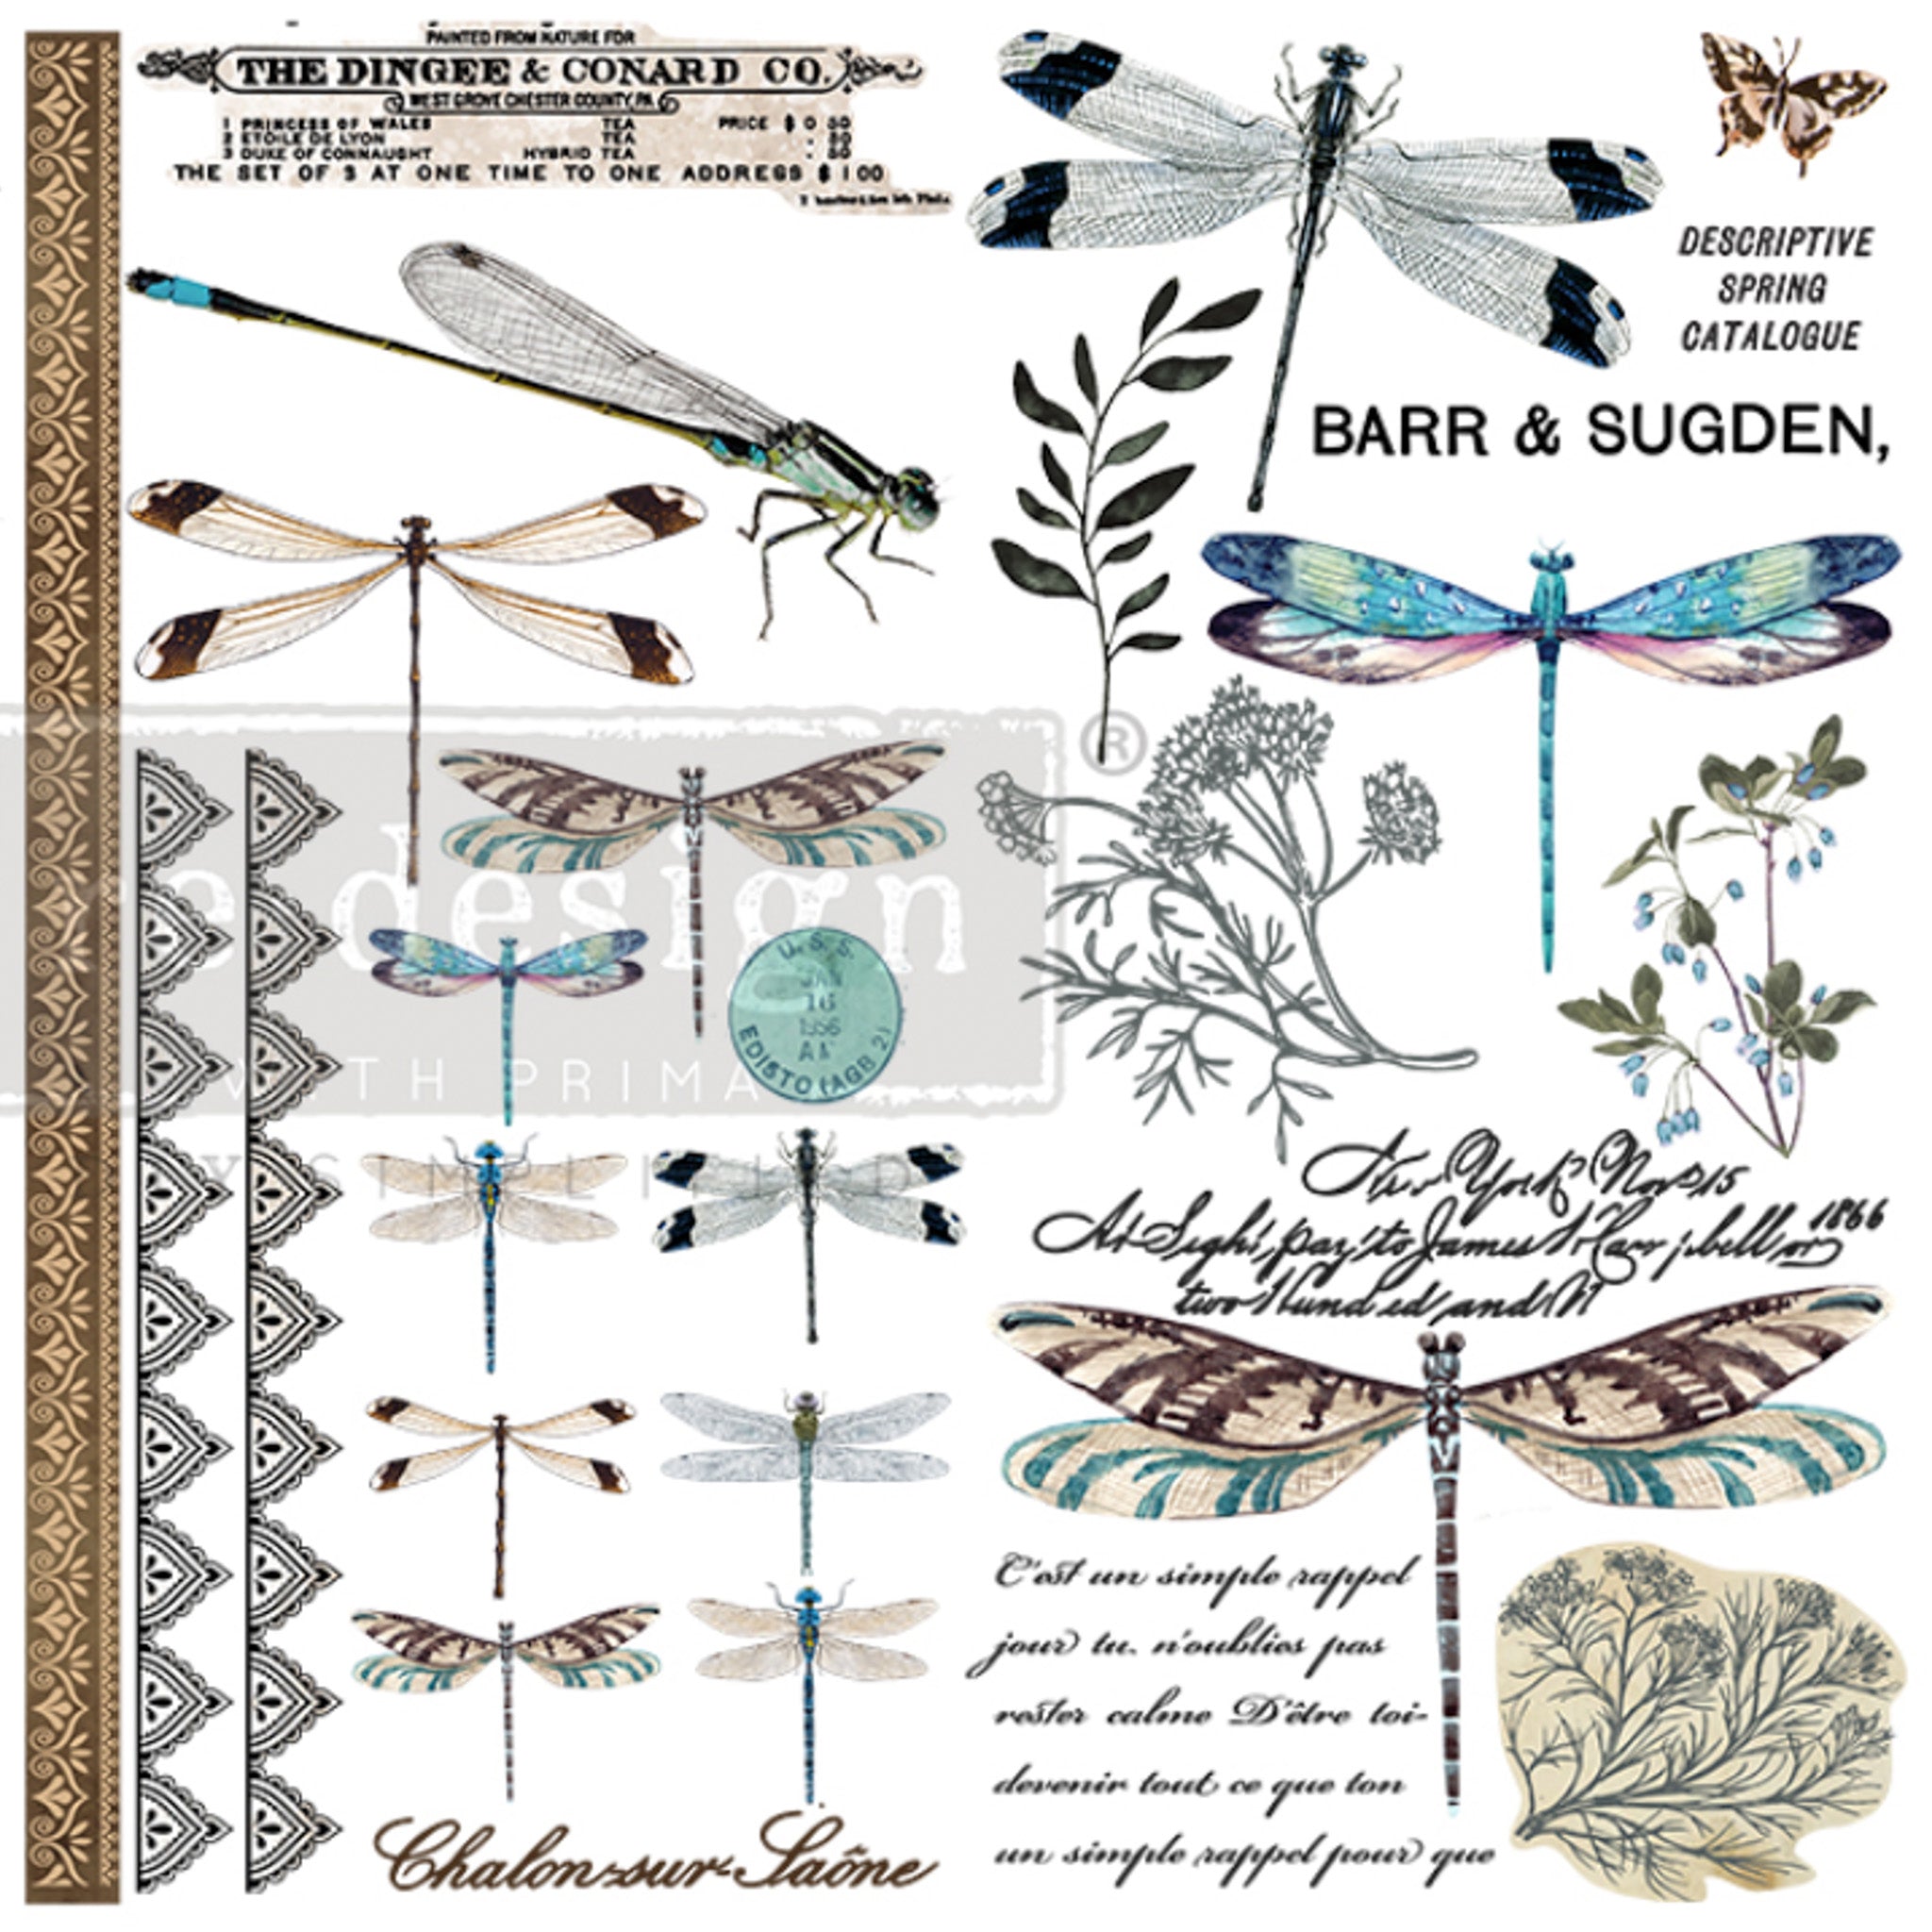 Small rub-on transfer design with lots of dragonflies, decorative borders, wildflowers, and some script writing.